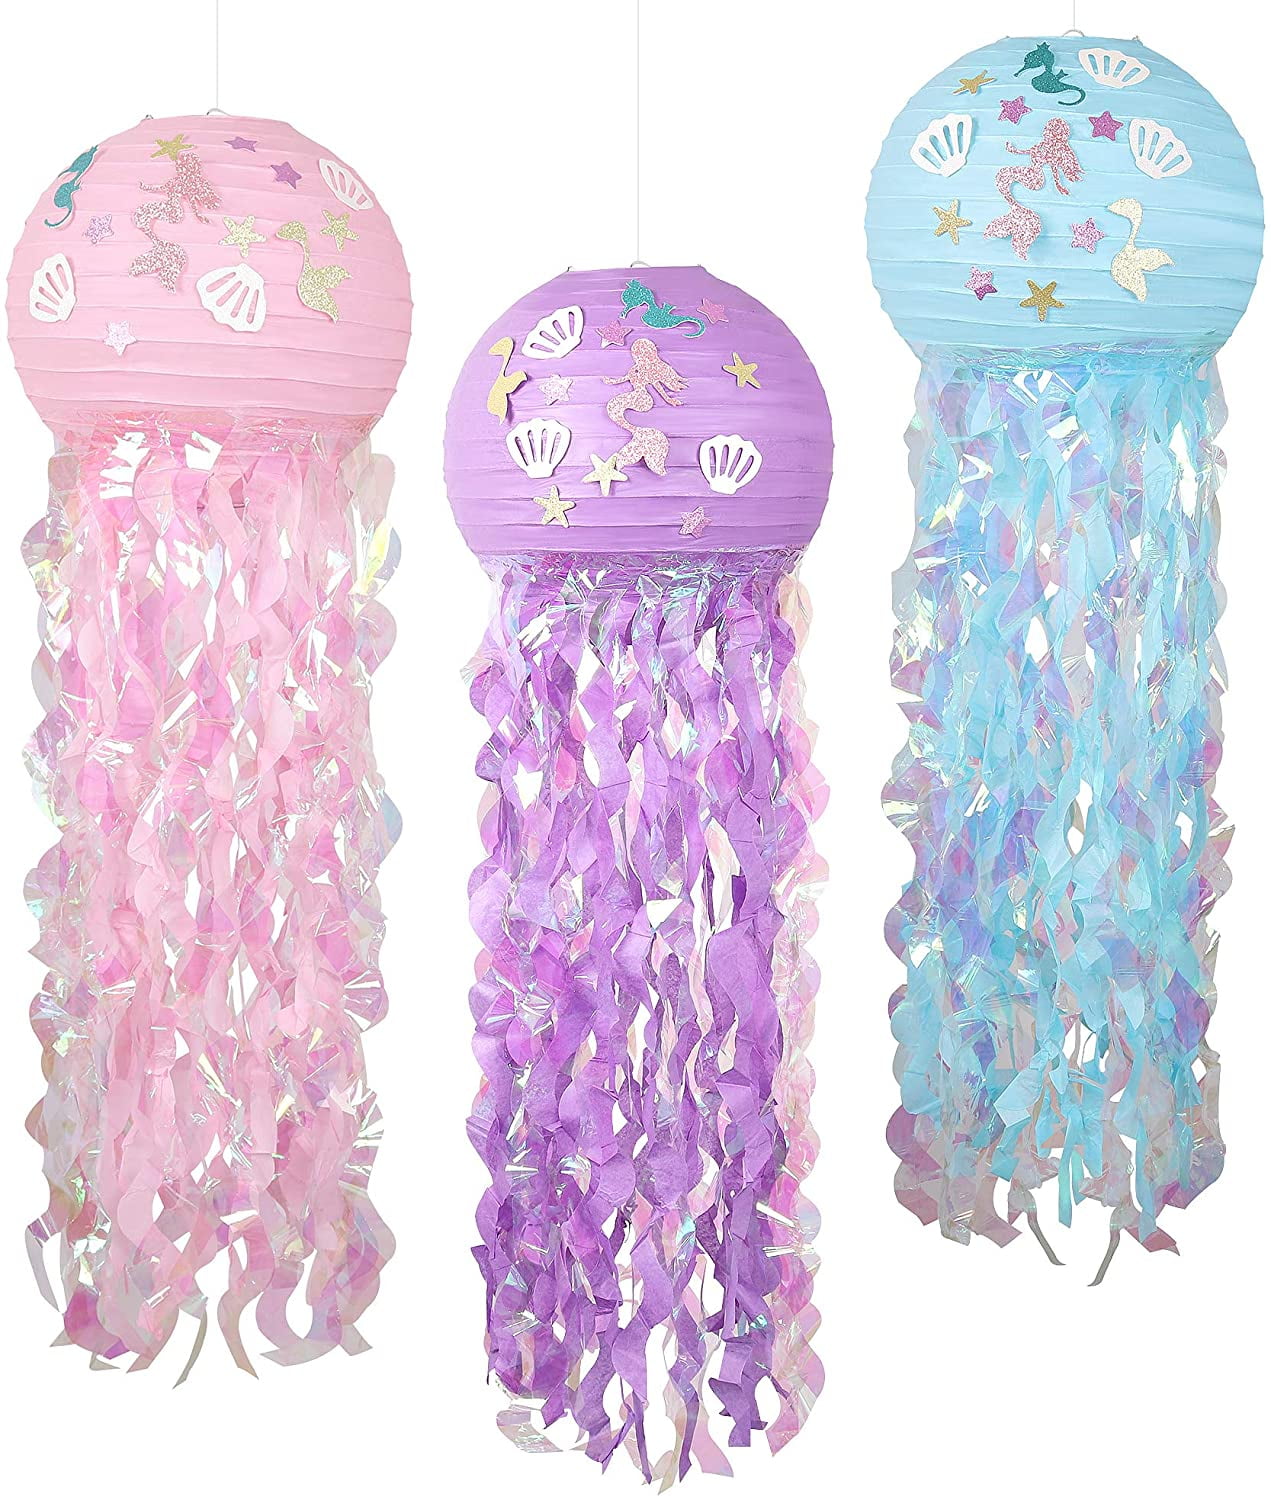 Naler 4 Pack Jellyfish Paper Lanterns 12 inch Hanging Mermaid Wishes Lantern  for Kids Birthday Baby Shower Party Decors,Multi-Color 